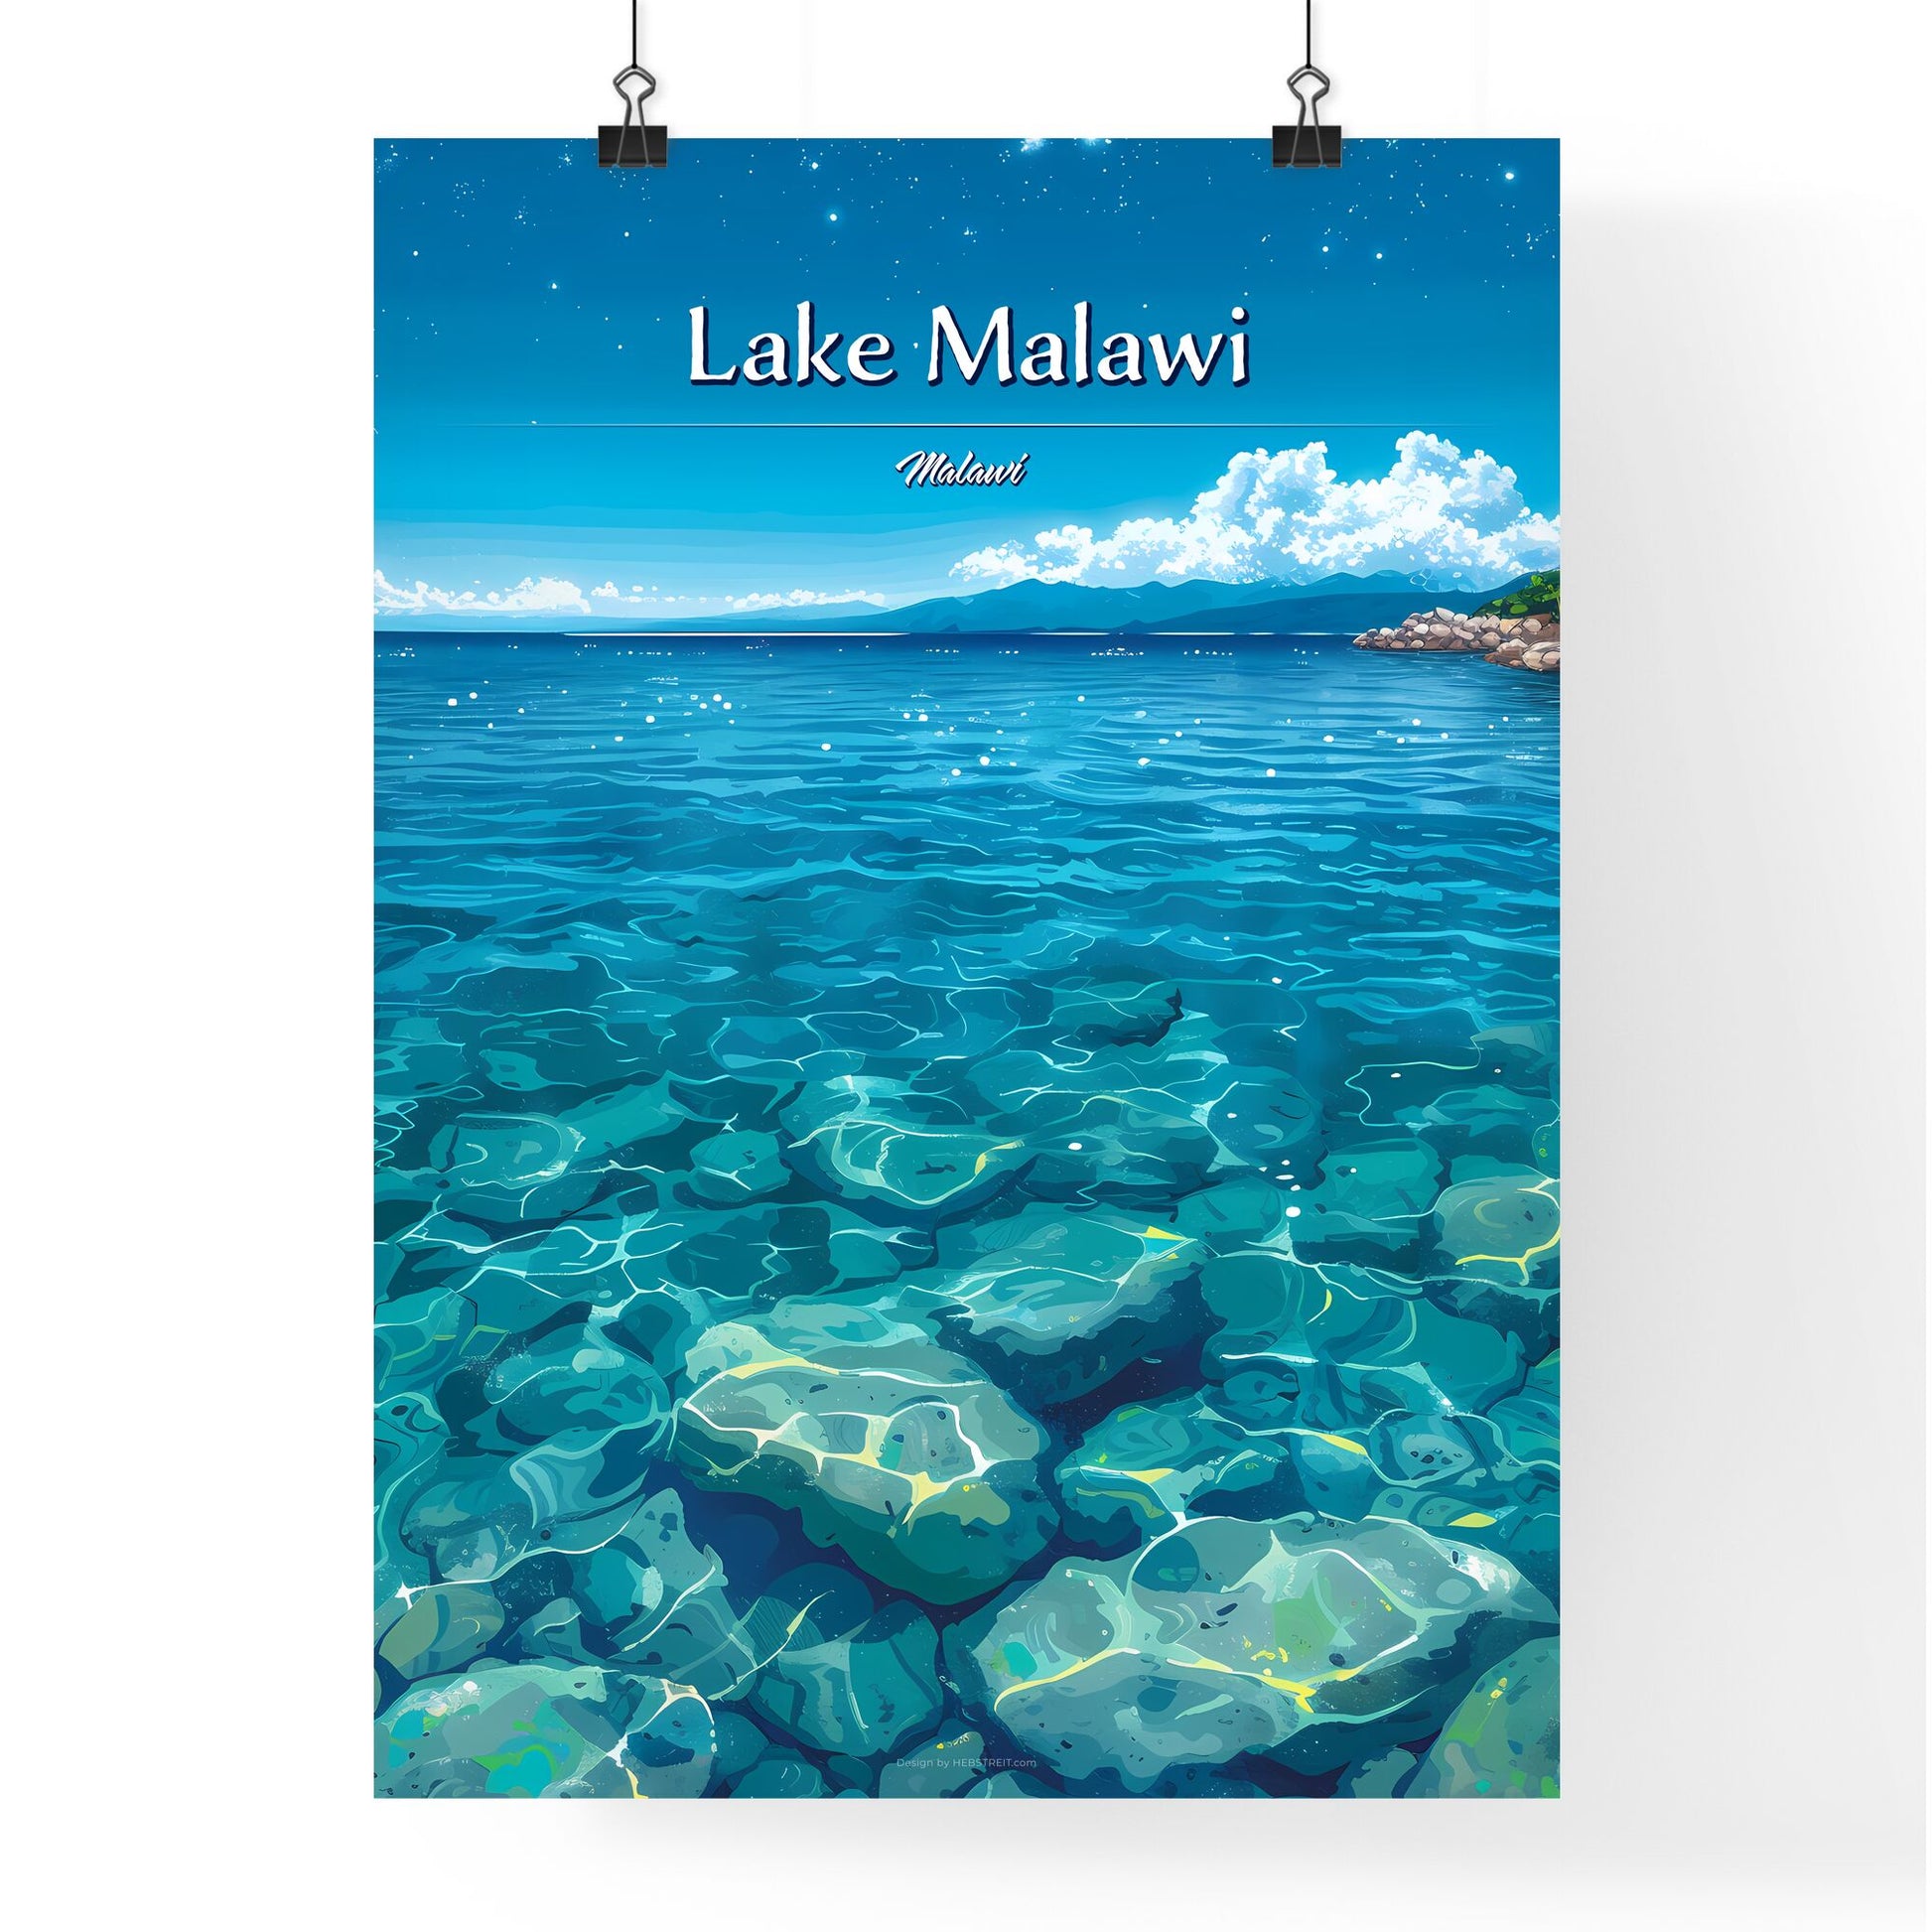 Lake Malawi, Malawi - Art print of a blue water with rocks and a rocky shore Default Title